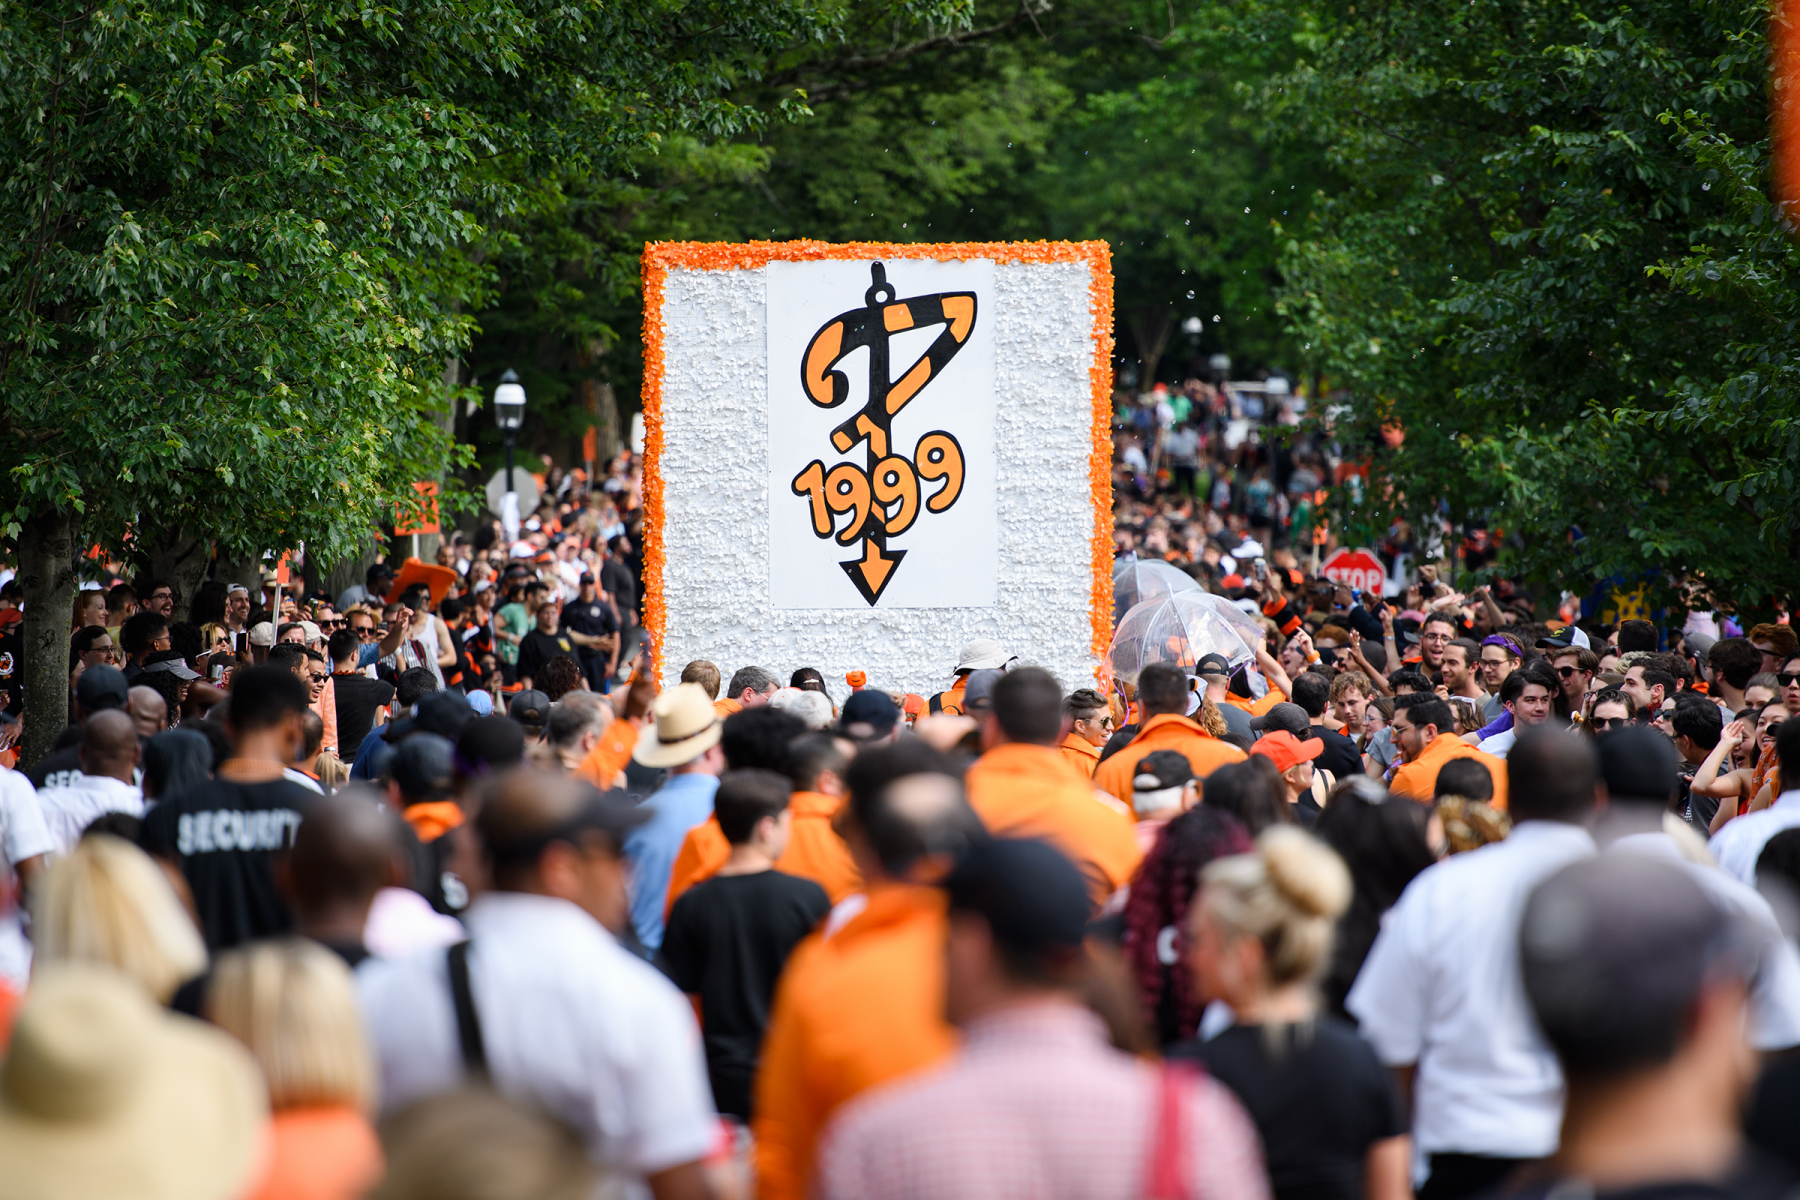 Reunions P-Rade and Class of 1999 sign